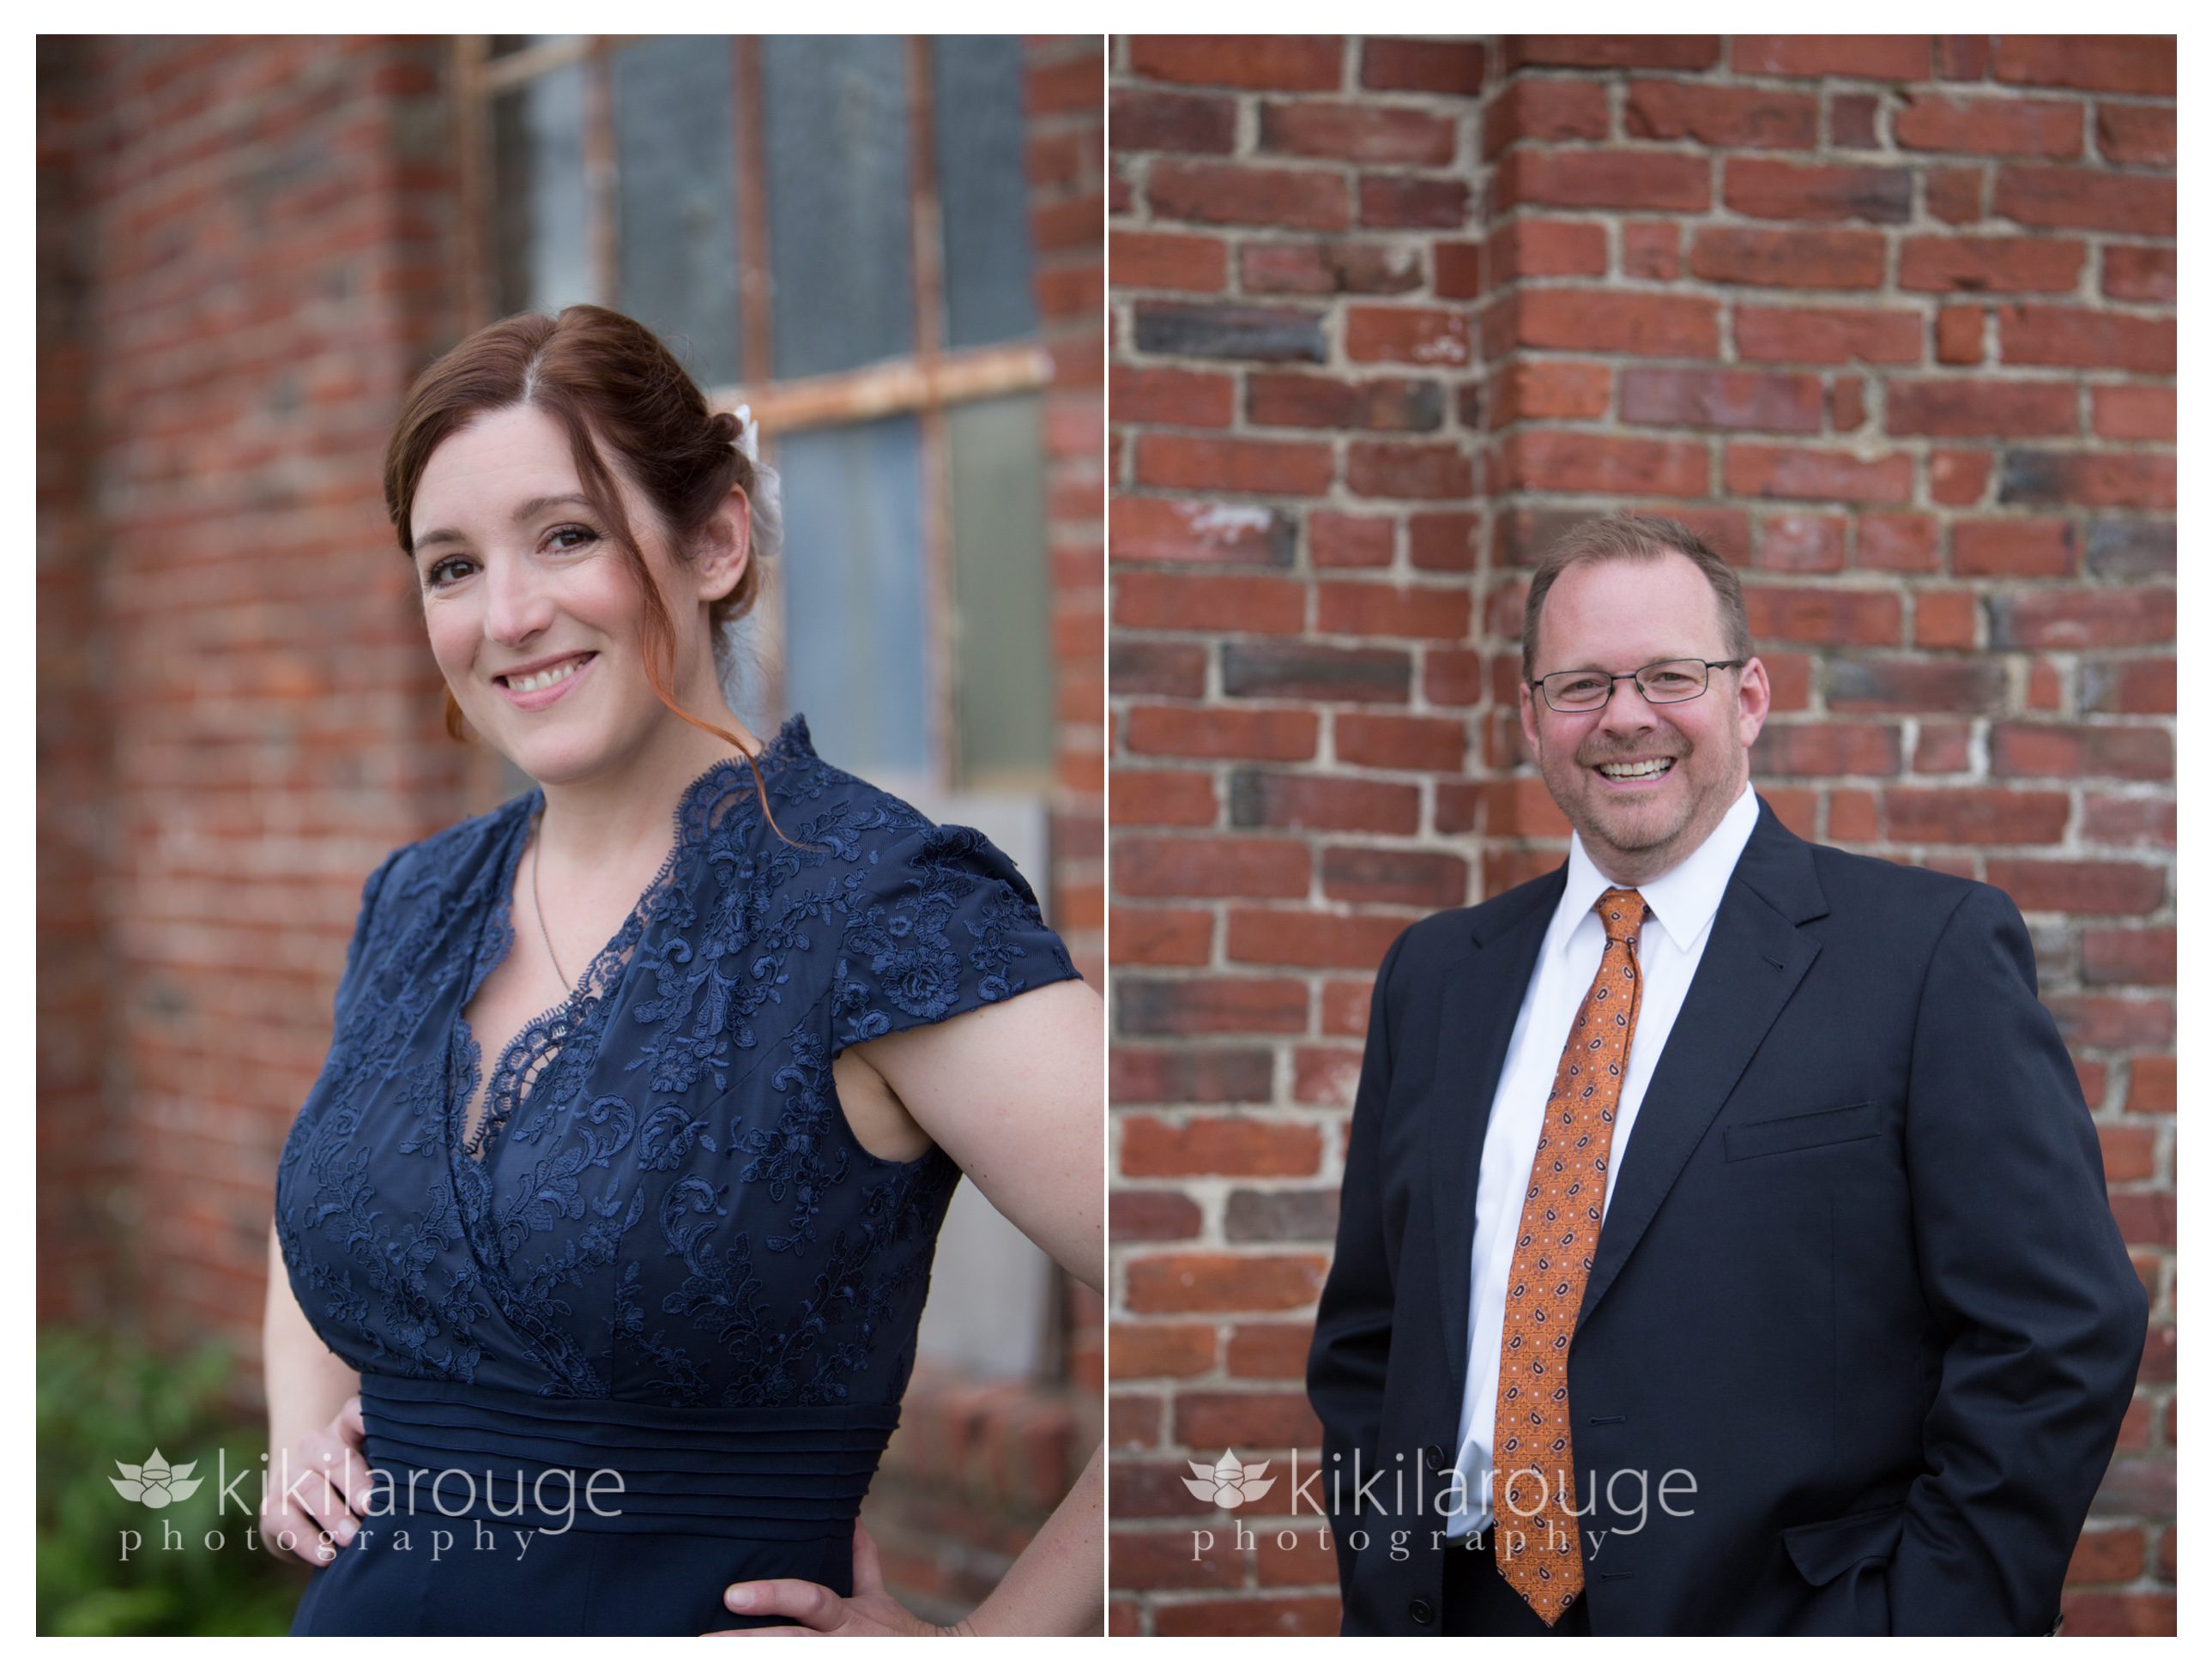 Bride and Groom portraits in front of brick wall